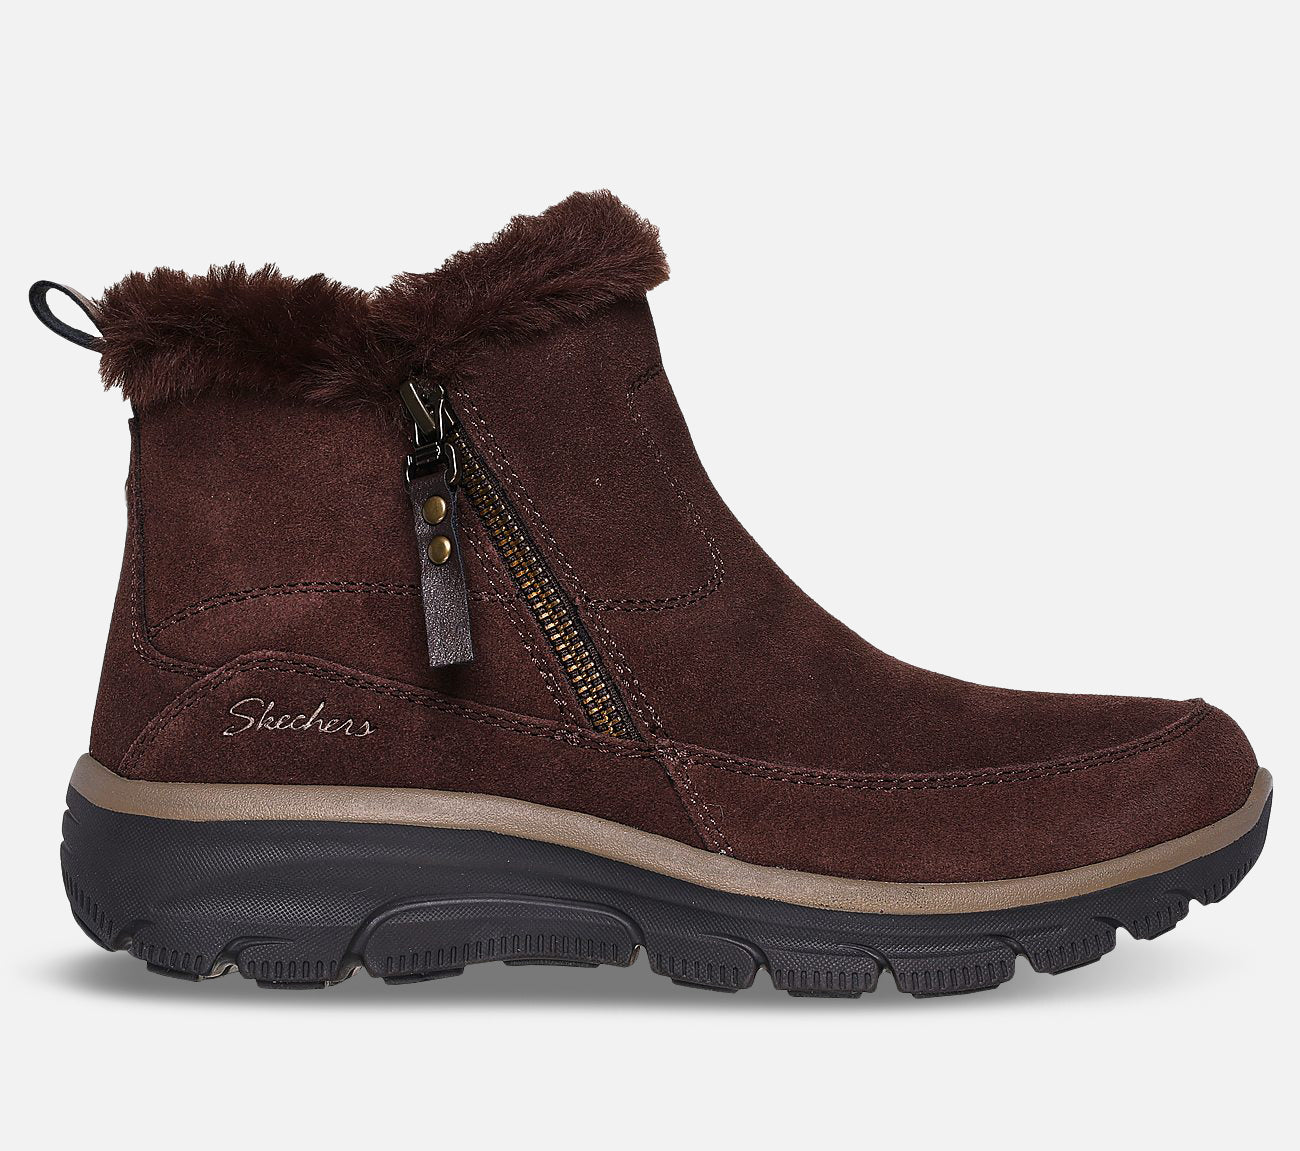 Relaxed Fit: Easy Going - Cool Zip Boot Skechers